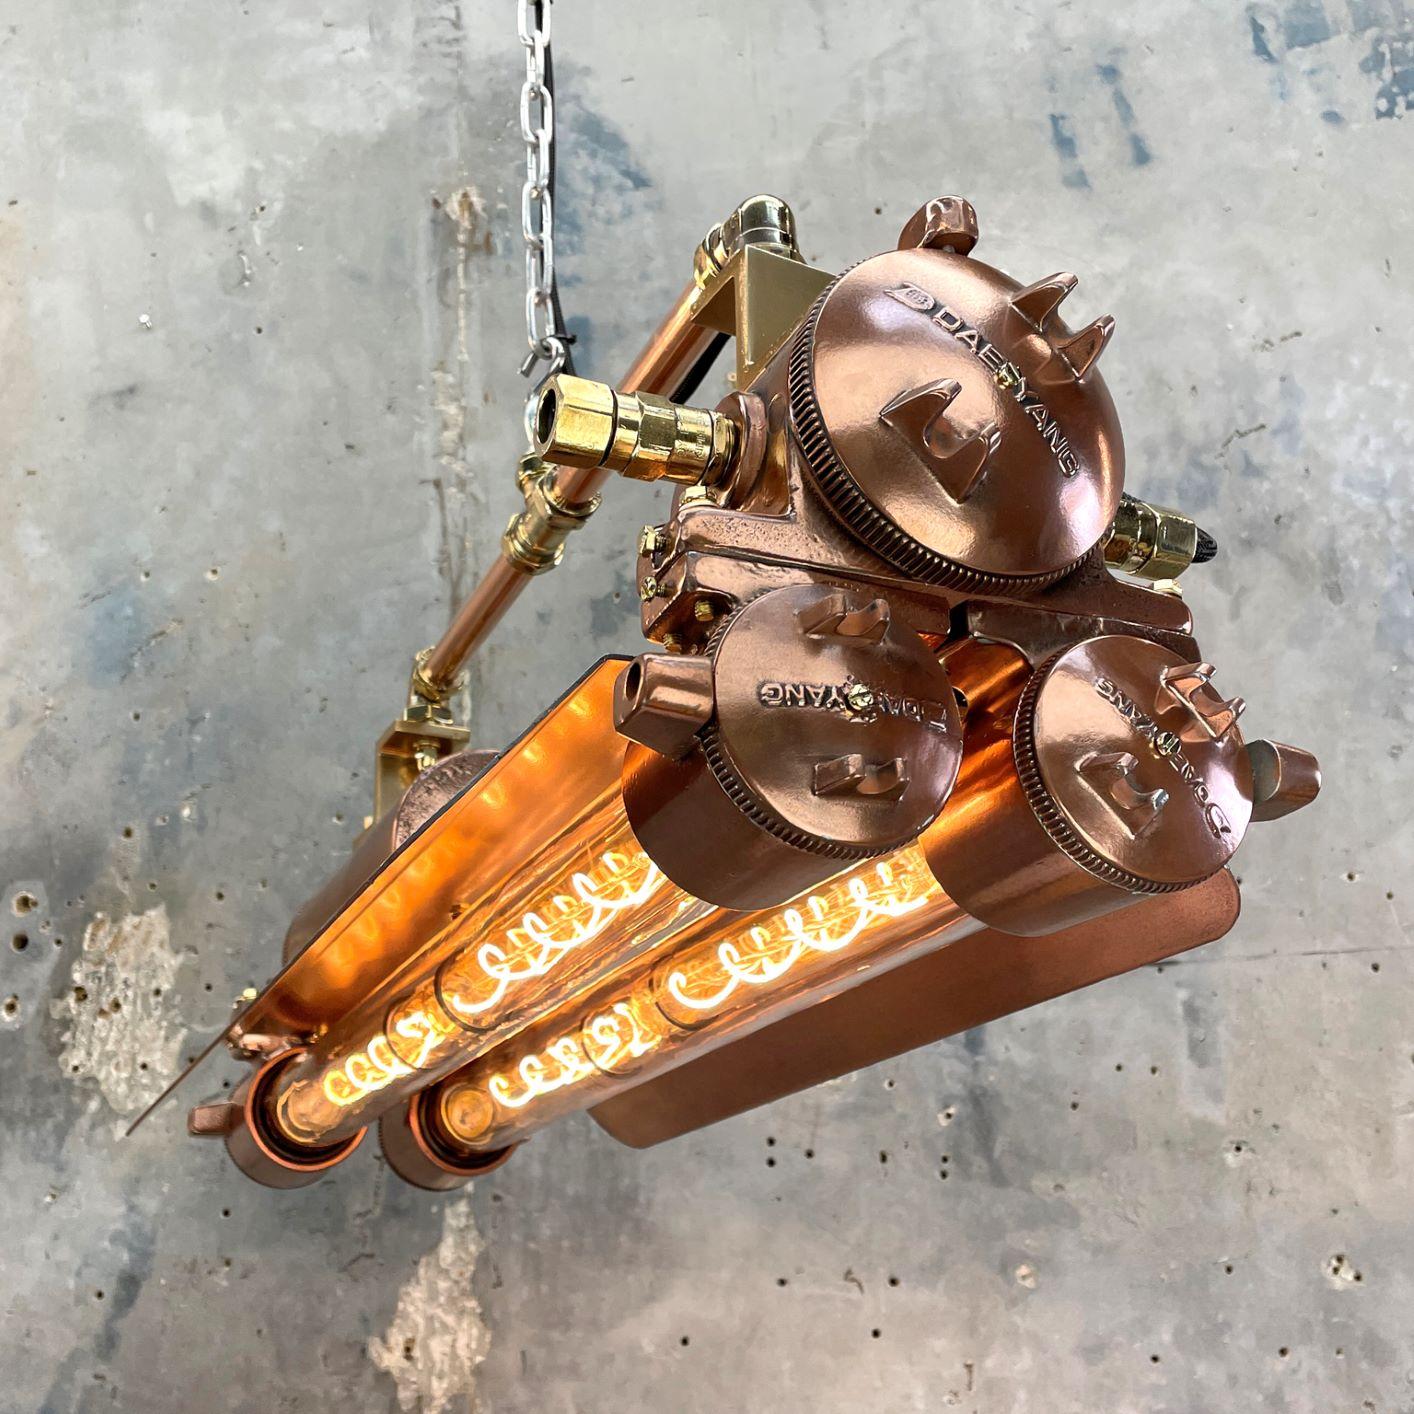 1970s vintage industrial copper and brass flameproof LED tube ceiling strip light made by Daeyang with adjustable suspension bar.
 
Original item salvaged from decommissioned ships then professionally restored in-house in the UK to modern lighting